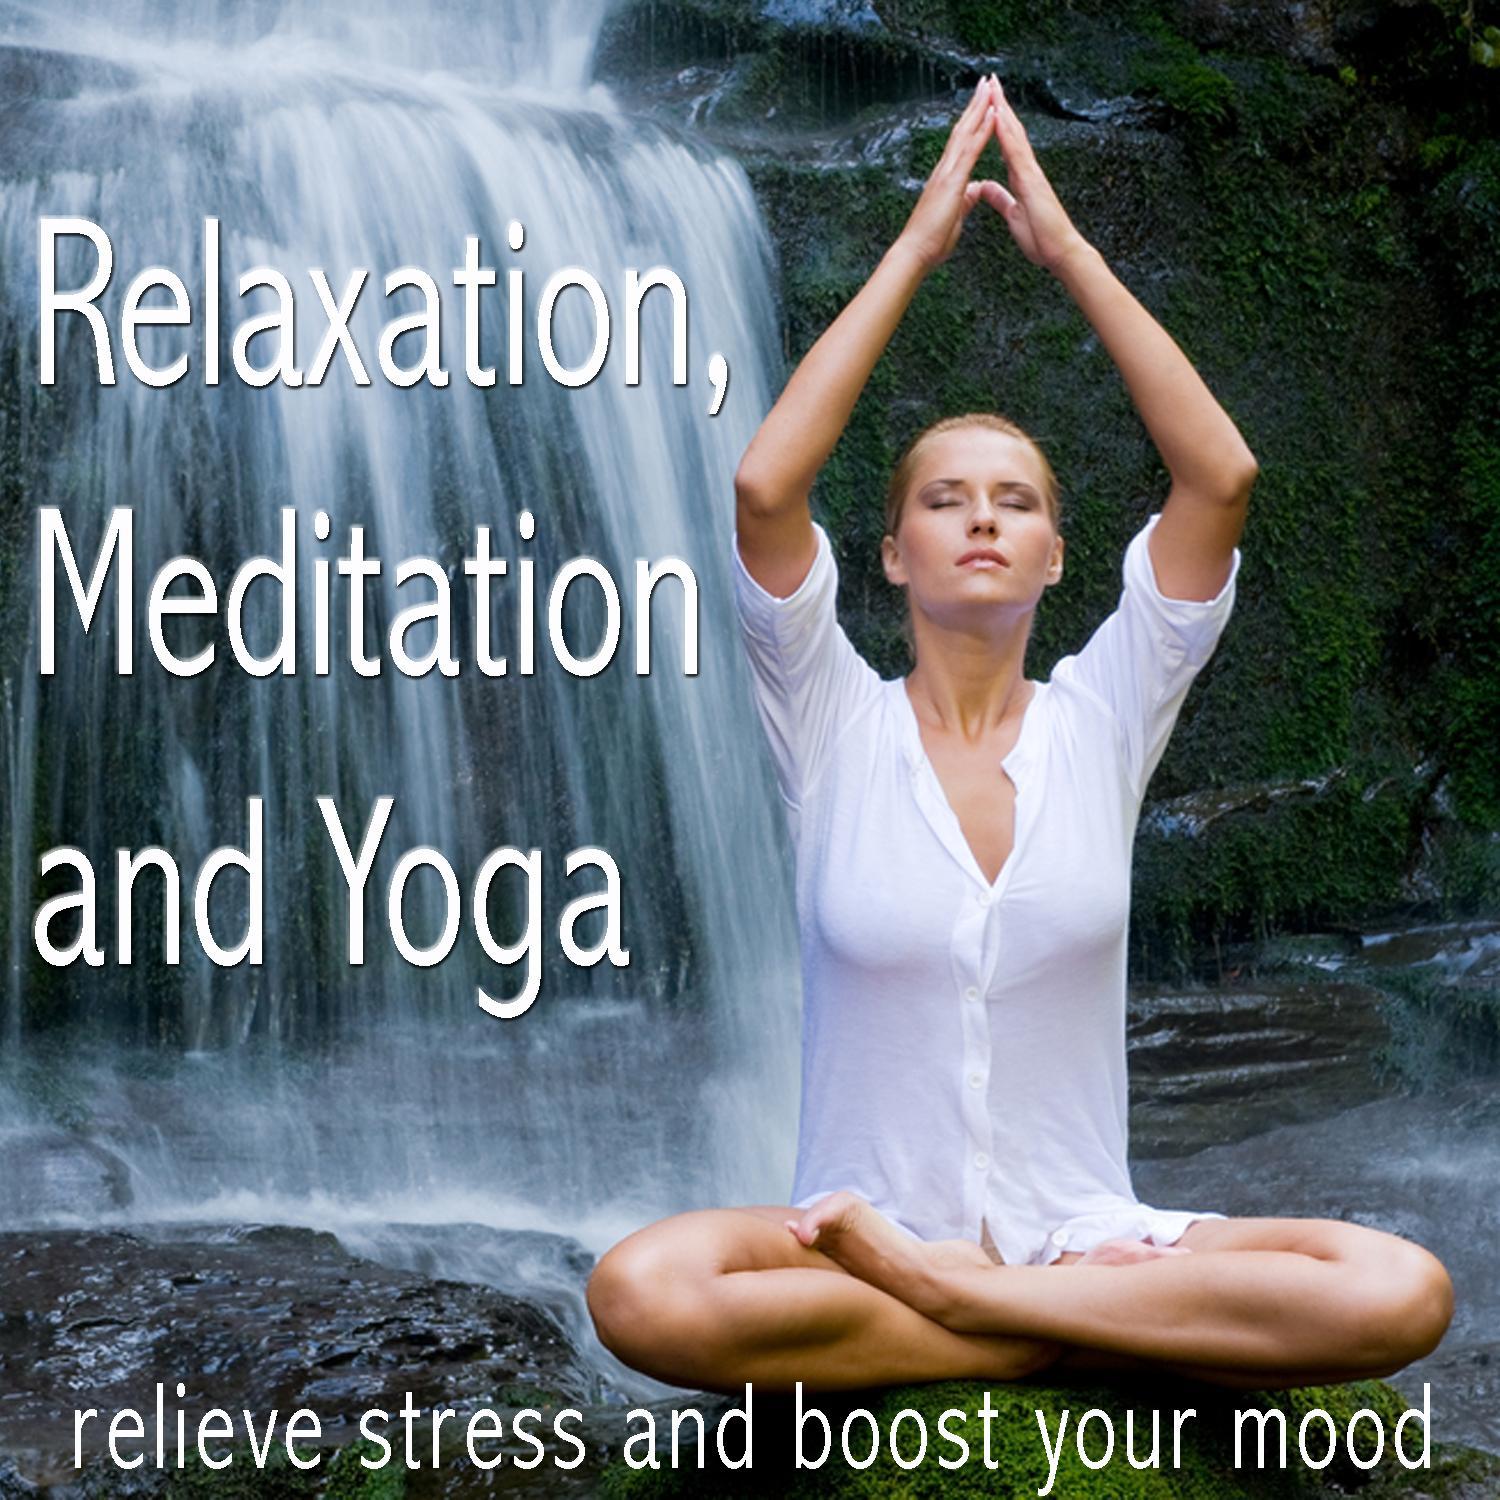 Classical Music for Relaxation, Meditation and Yoga